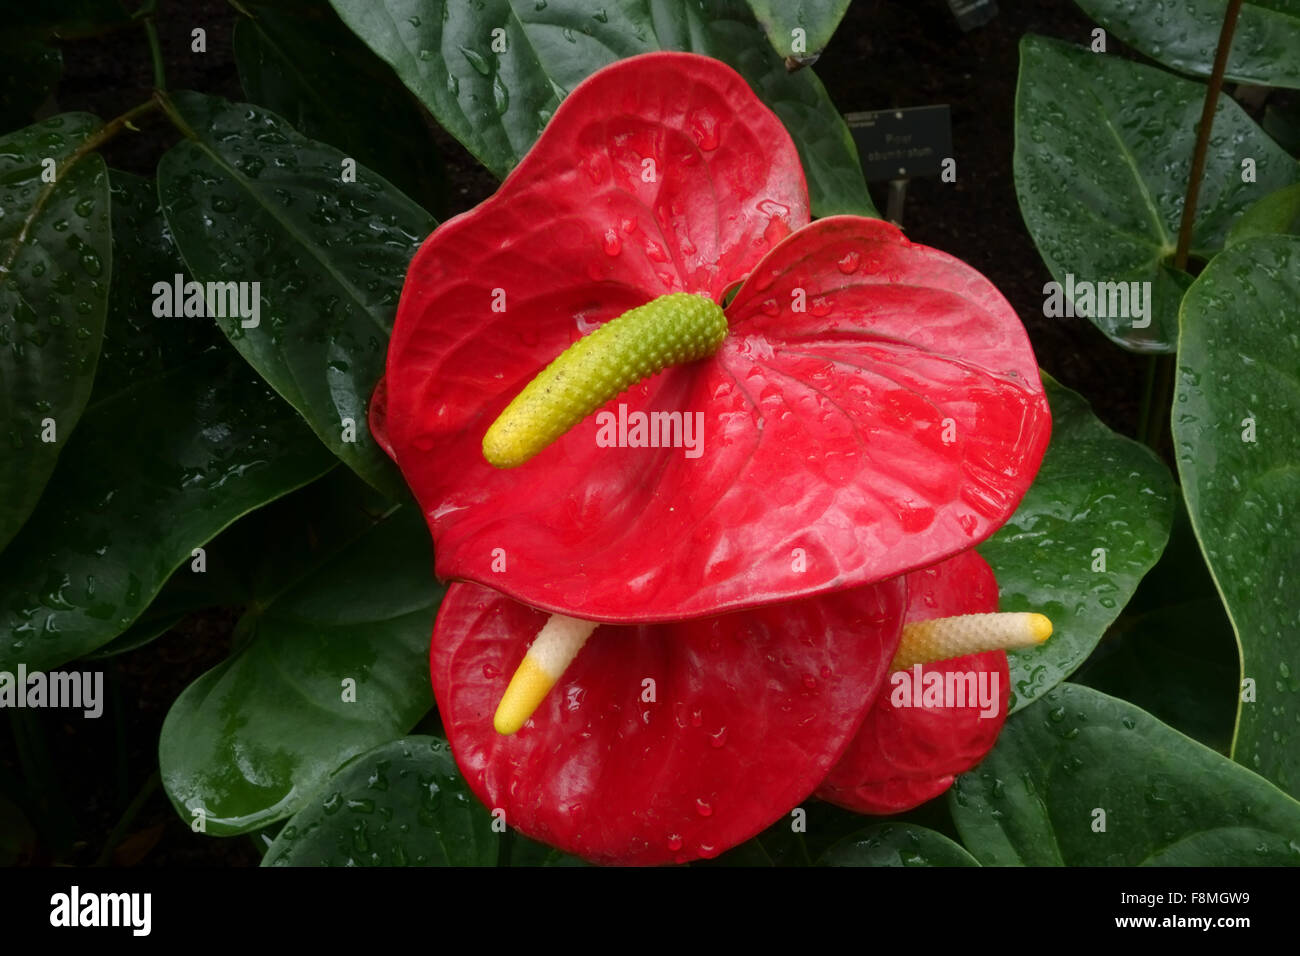 Red heart-shaped Anthurium sp. bract and flower spadix in a hothouse environment with misted water droplets on the leaves Stock Photo